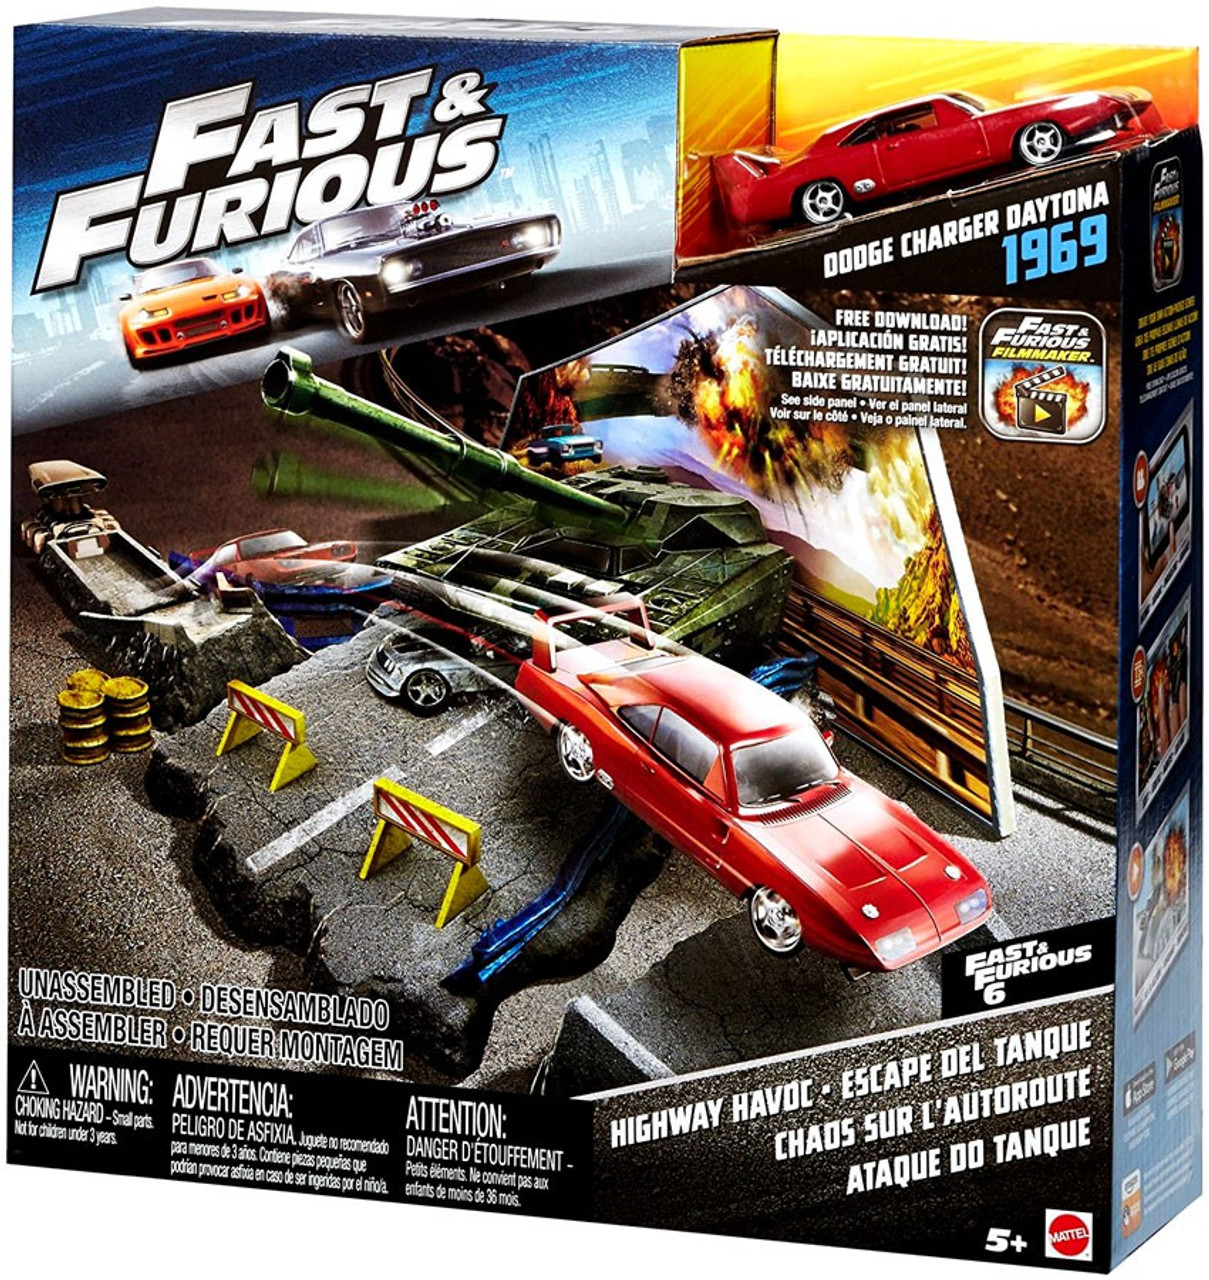 The Fast And The Furious Fast Furious 6 Highway Havoc Playset Dodge Charger Daytona 1969 Mattel Toys Toywiz - dodge pack review nascar 19 daytona roblox